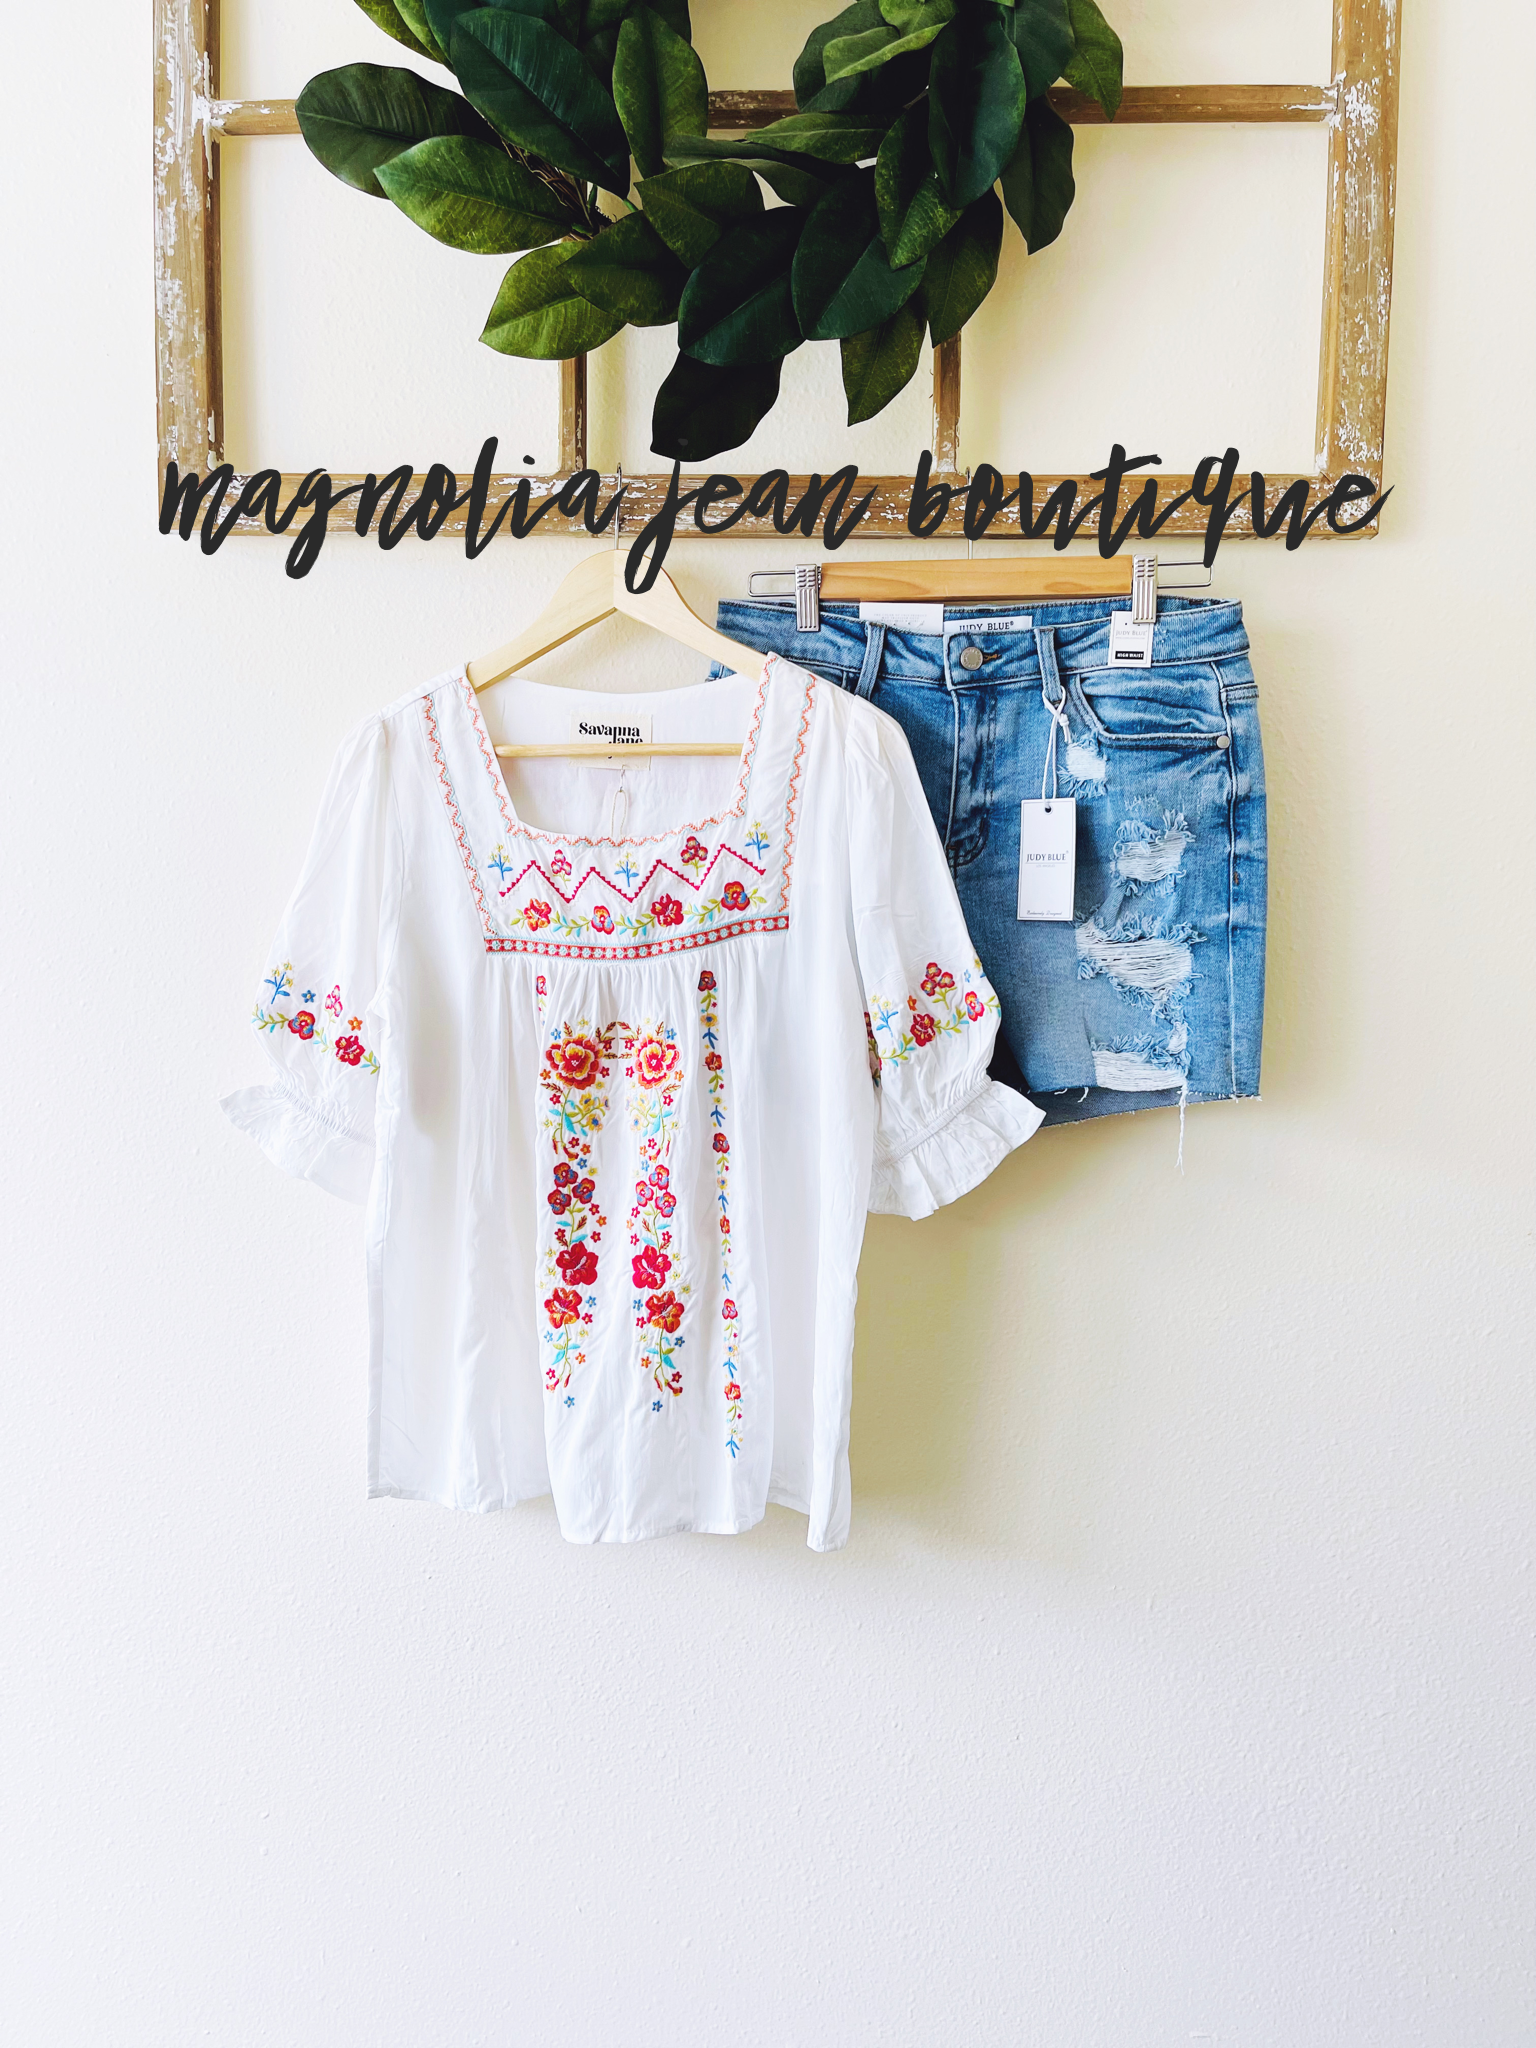 Wildflower White Embroidery Top